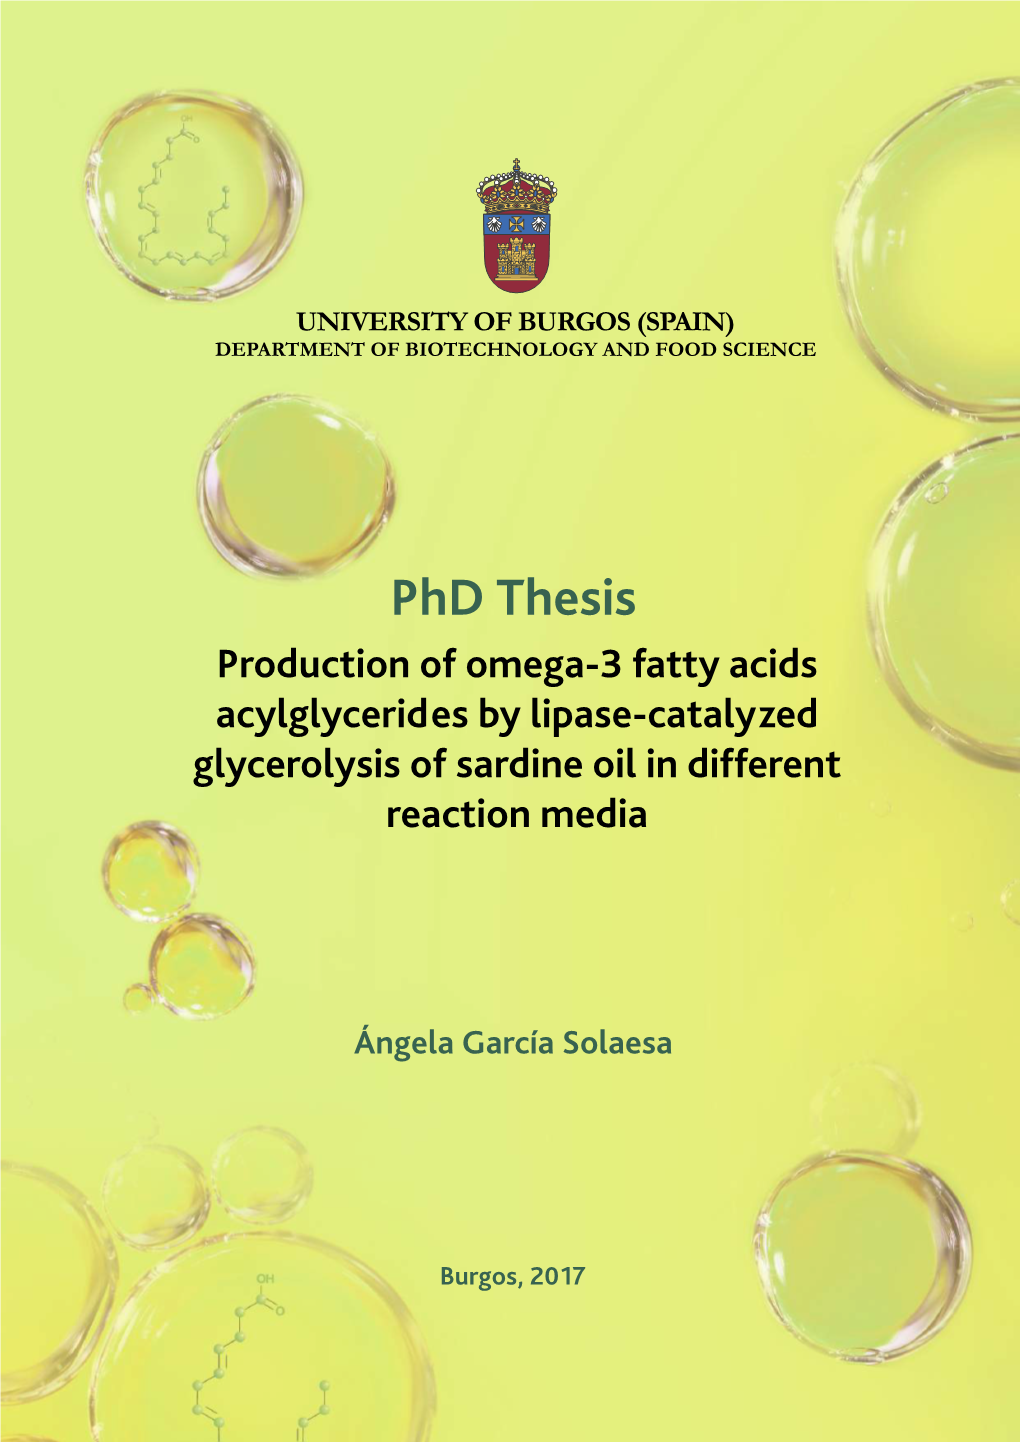 Production of Omega-3 Fatty Acids Acylglycerides by Lipase-Catalyzed Glycerolysis of Sardine Oil in Different Reaction Media